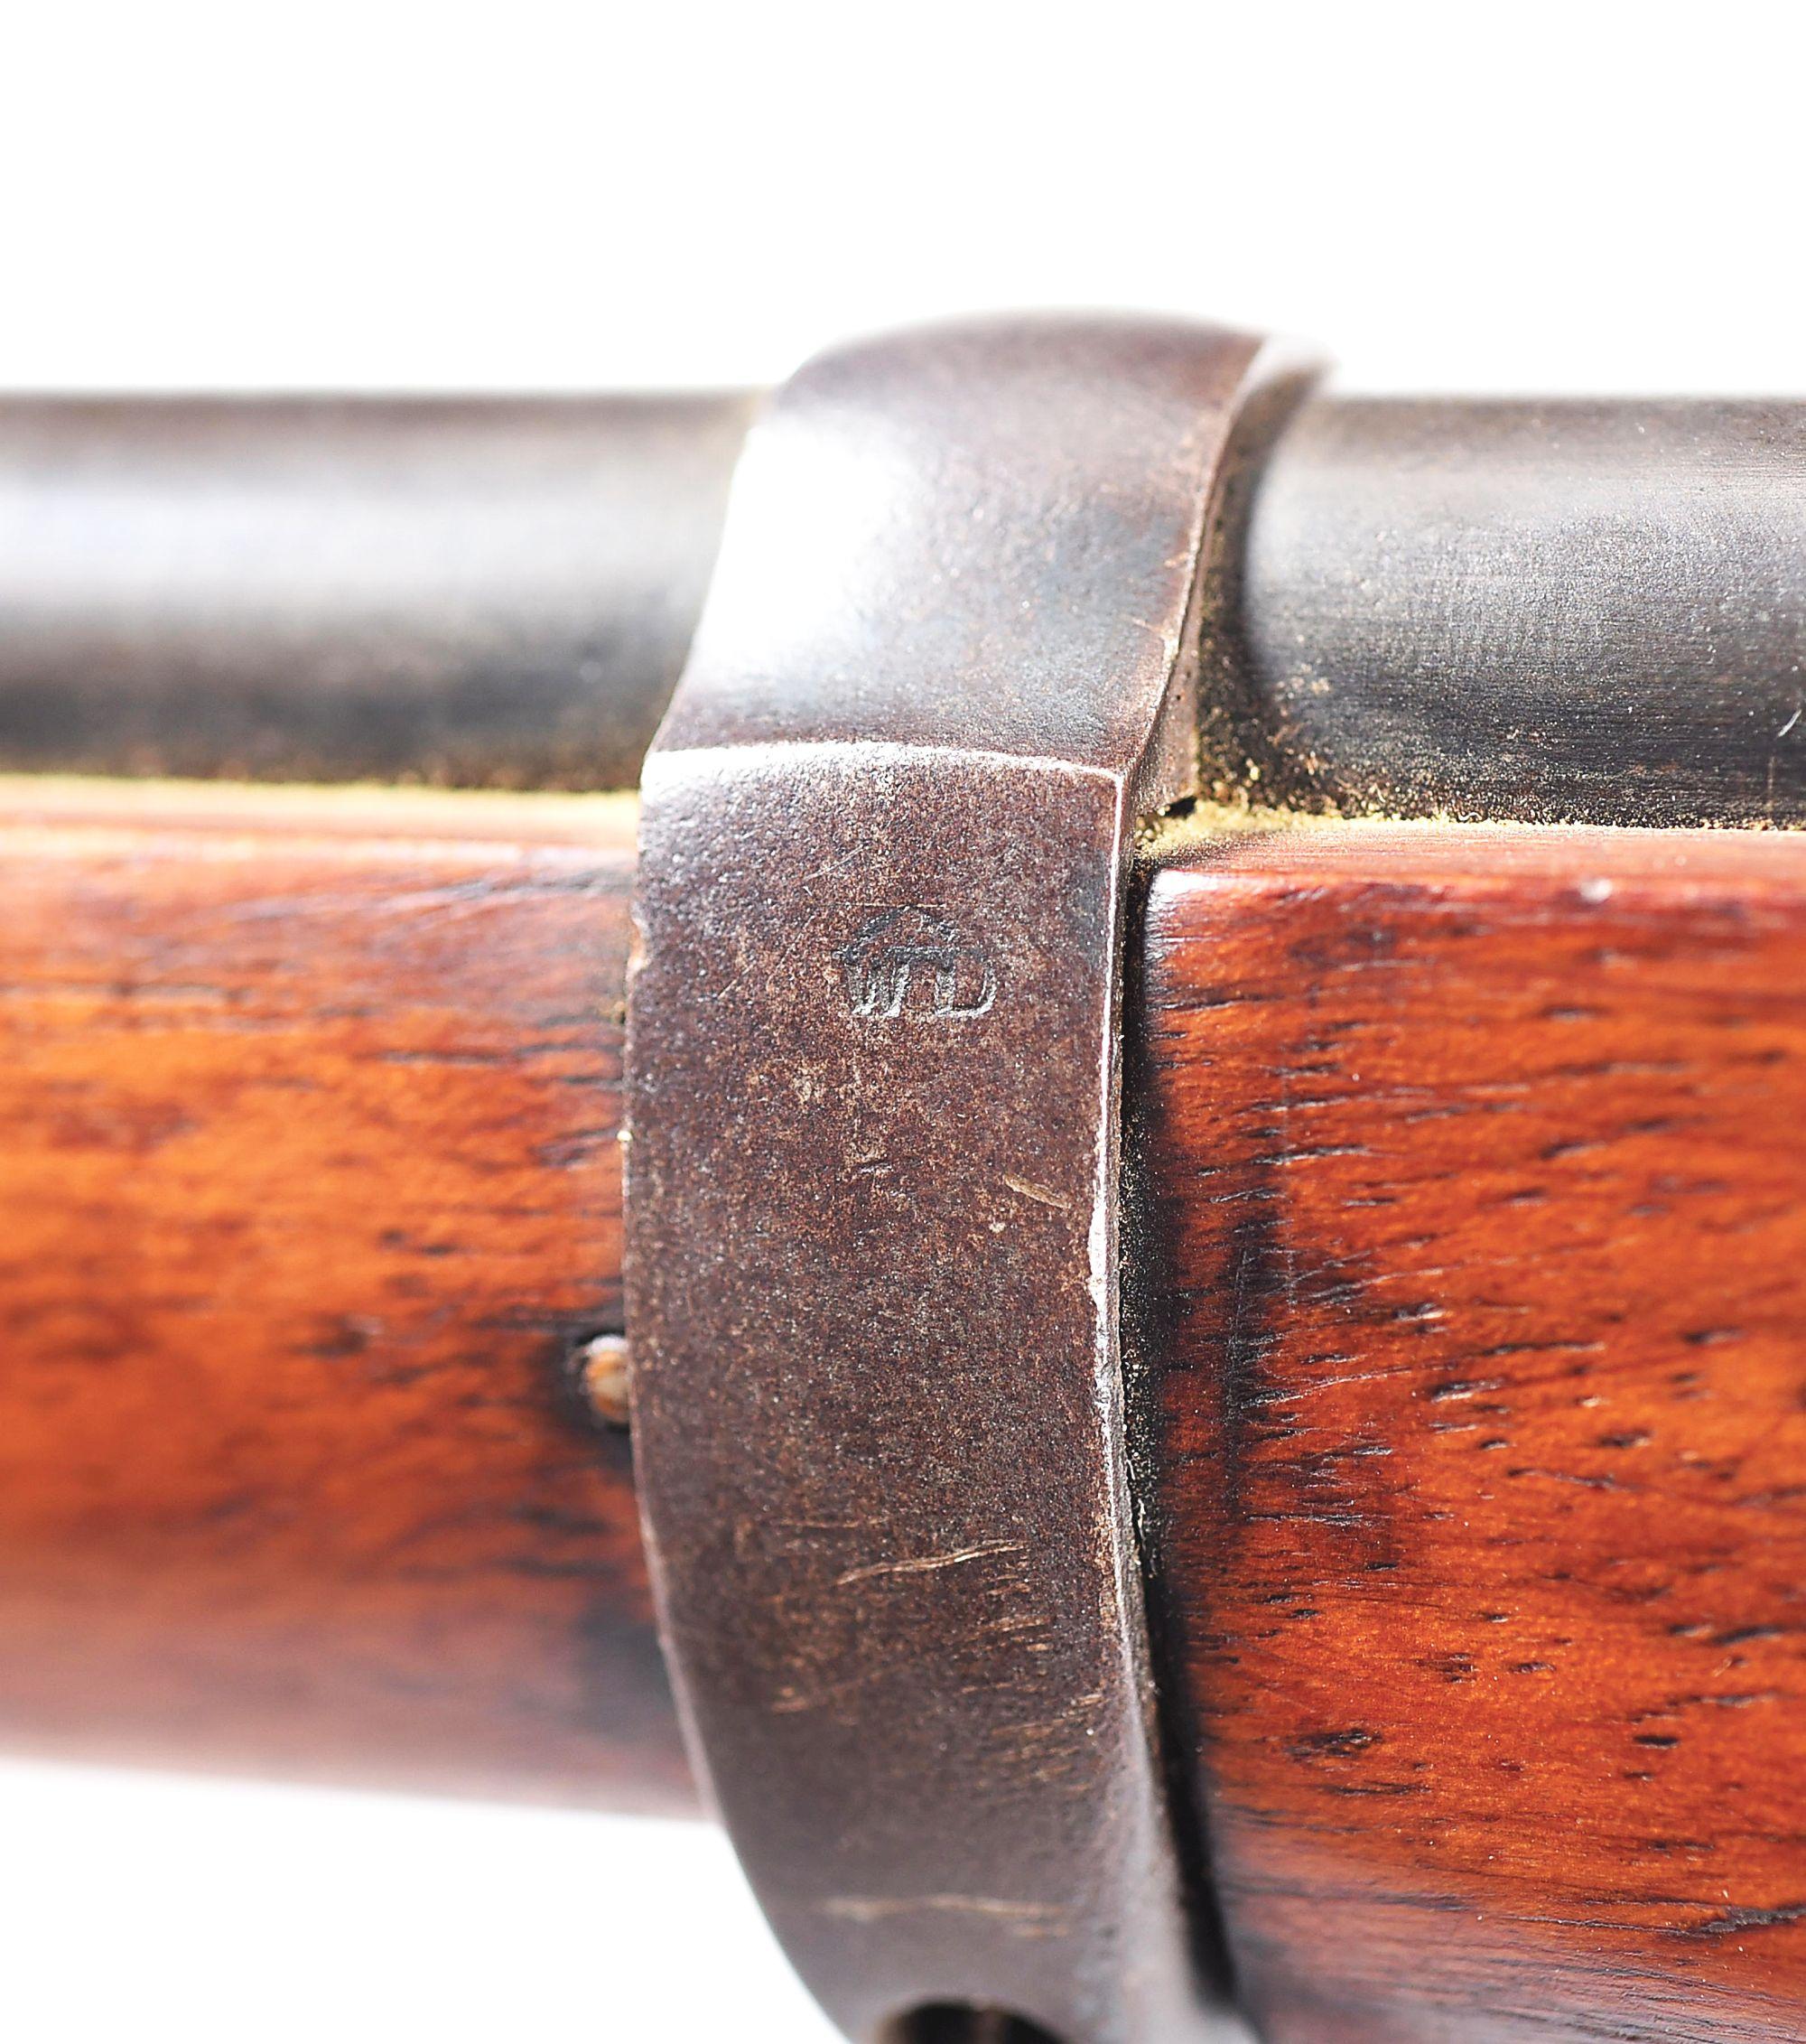 (A) SCARCE EARLY ENFIELD LEE-METFORD MK II BOLT ACTION RIFLE.